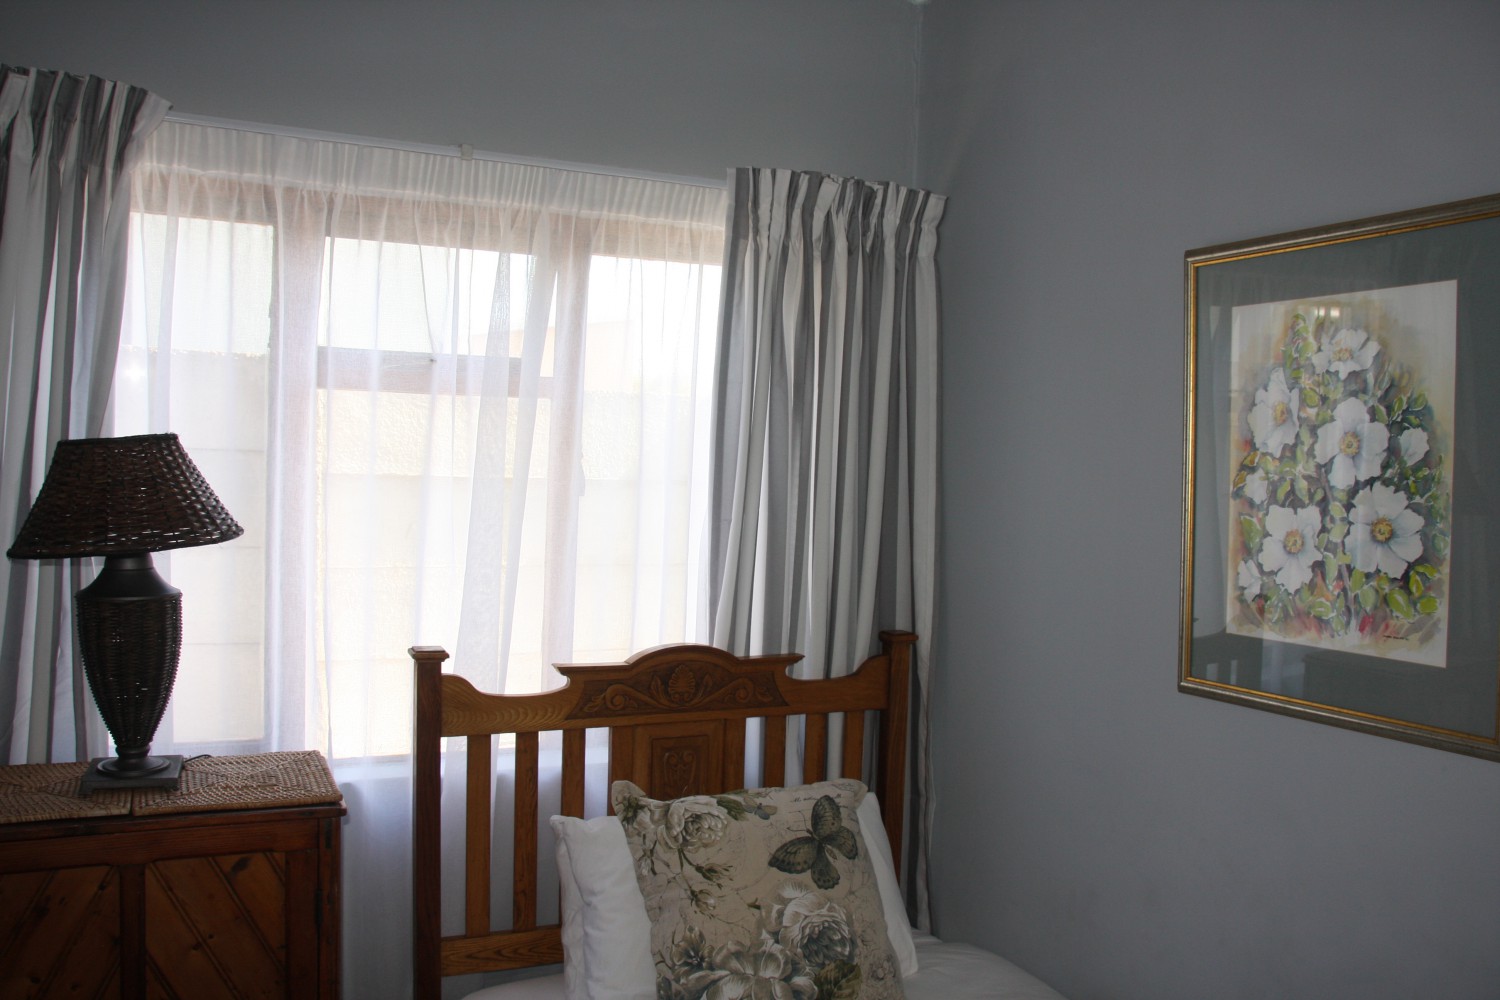 Holiday Apartments to rent in Struisbaai, Overberg District, South Africa